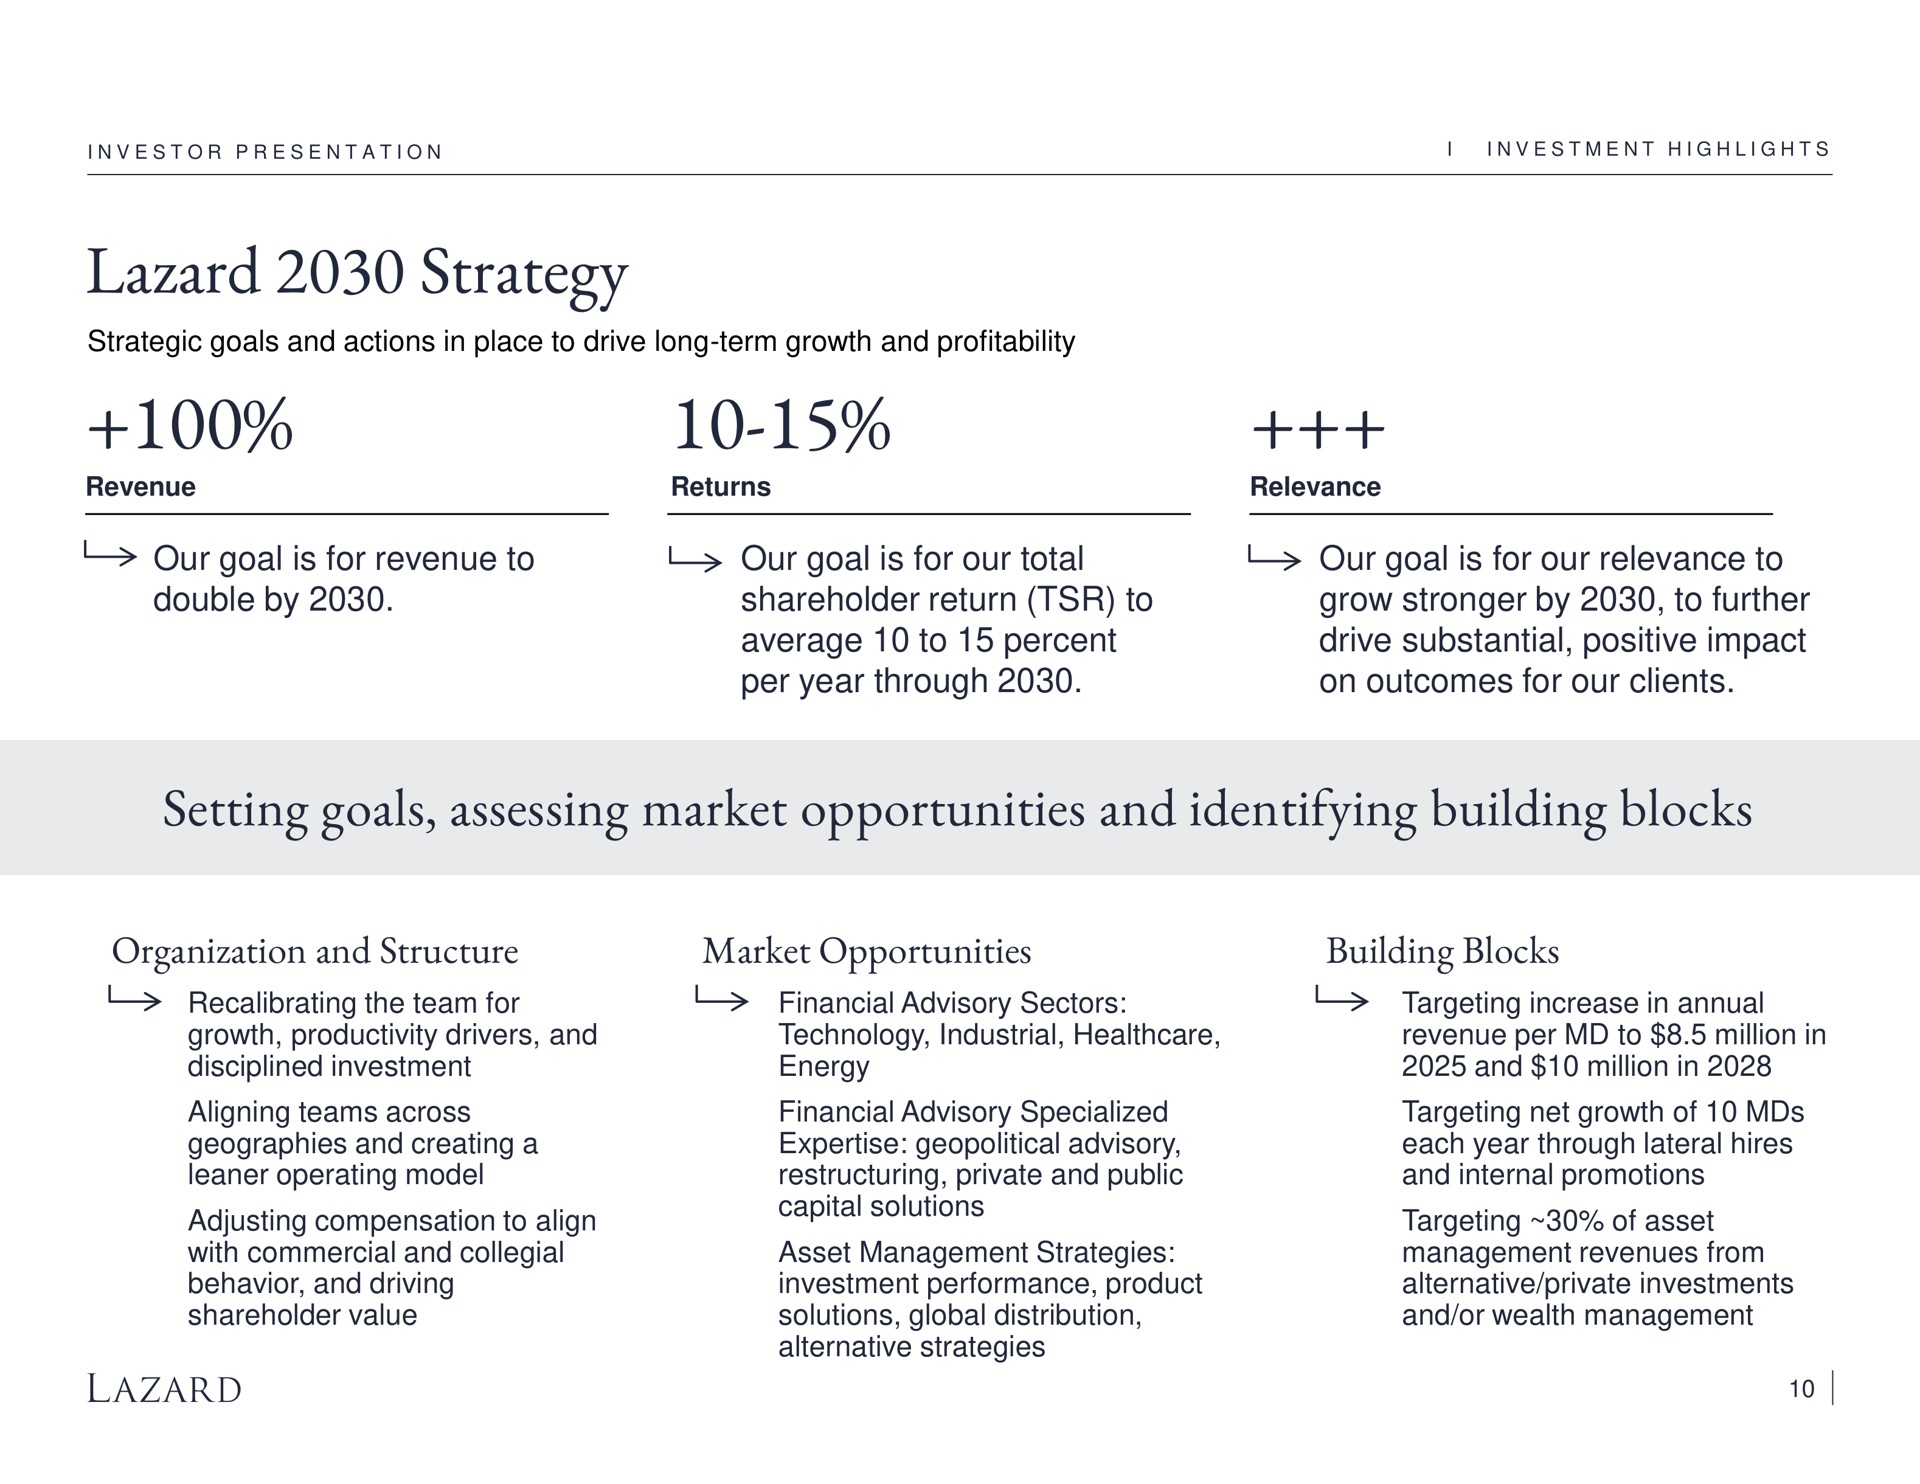 strategy our goal is for revenue to double by our goal is for our total shareholder return to average to percent per year through our goal is for our relevance to grow by to further drive substantial positive impact on outcomes for our clients setting goals assessing market opportunities and identifying building blocks organization and structure market opportunities building blocks | Lazard